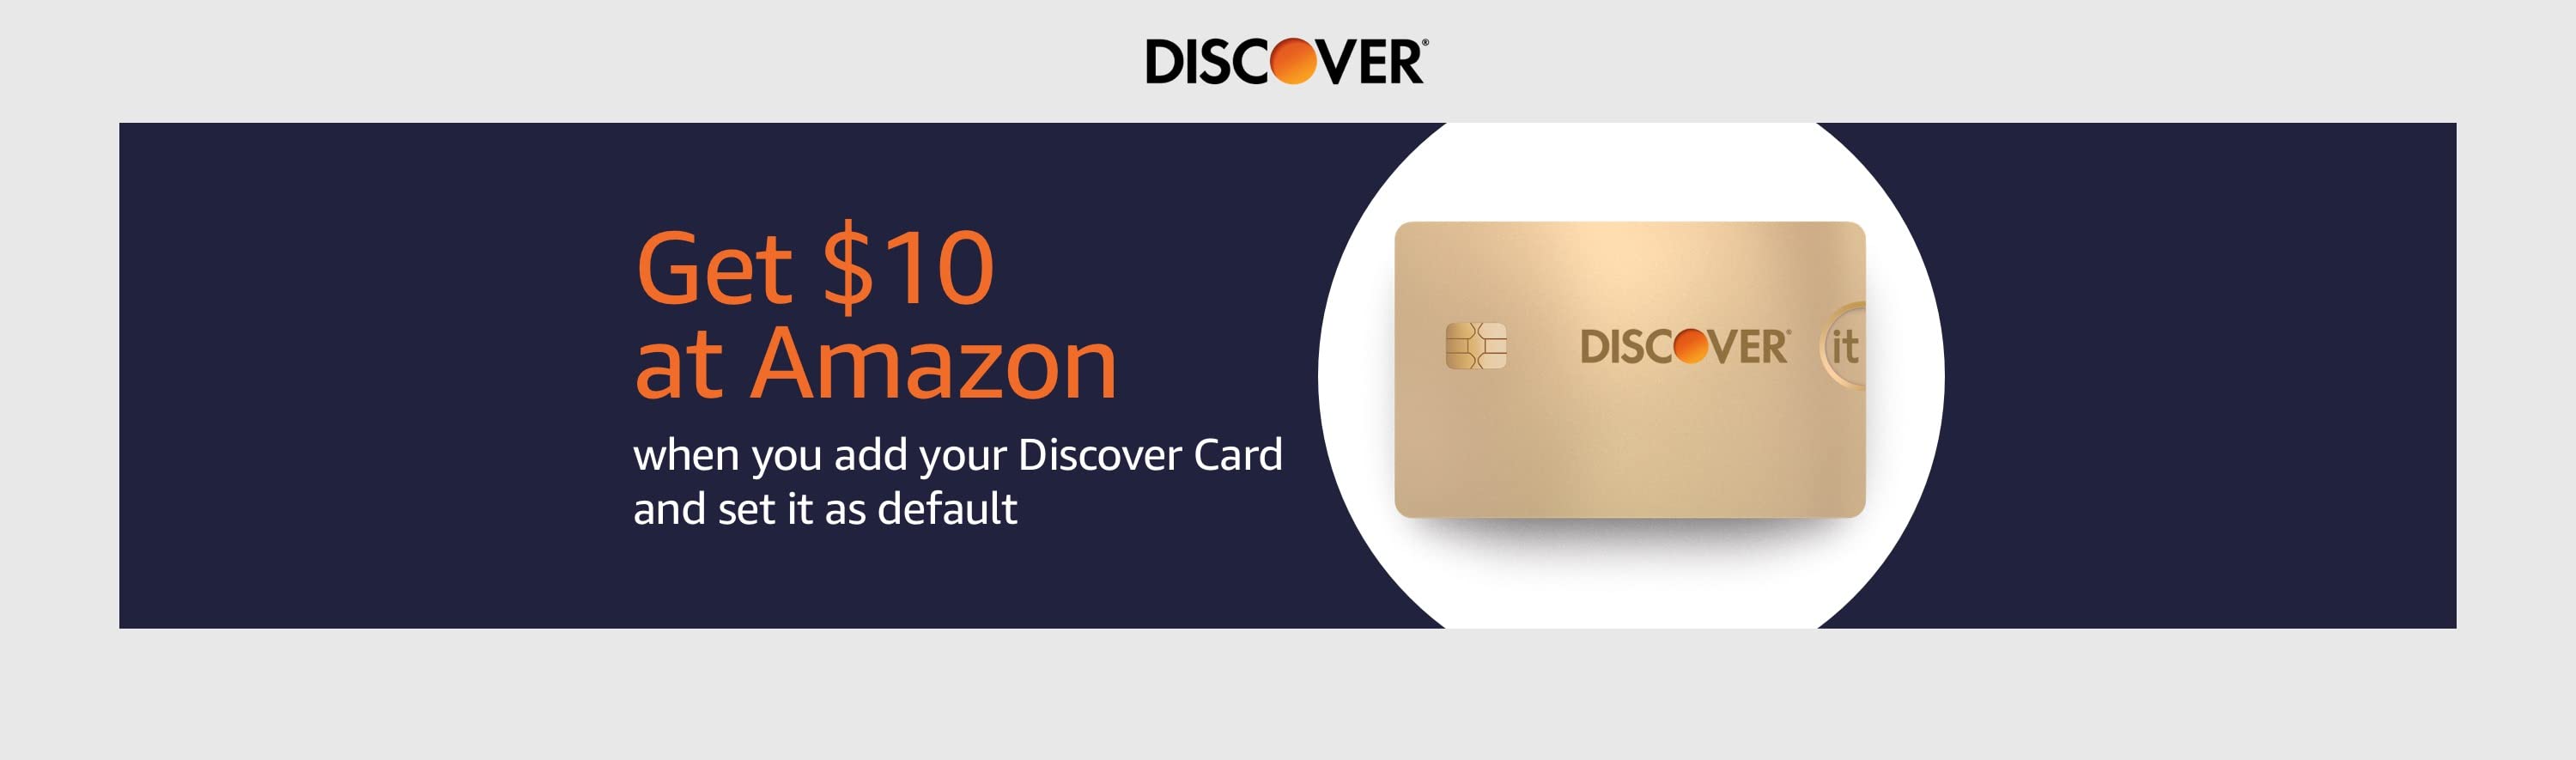 Get $10 at Amazon when you add your Discover card and make it default payment YMMV